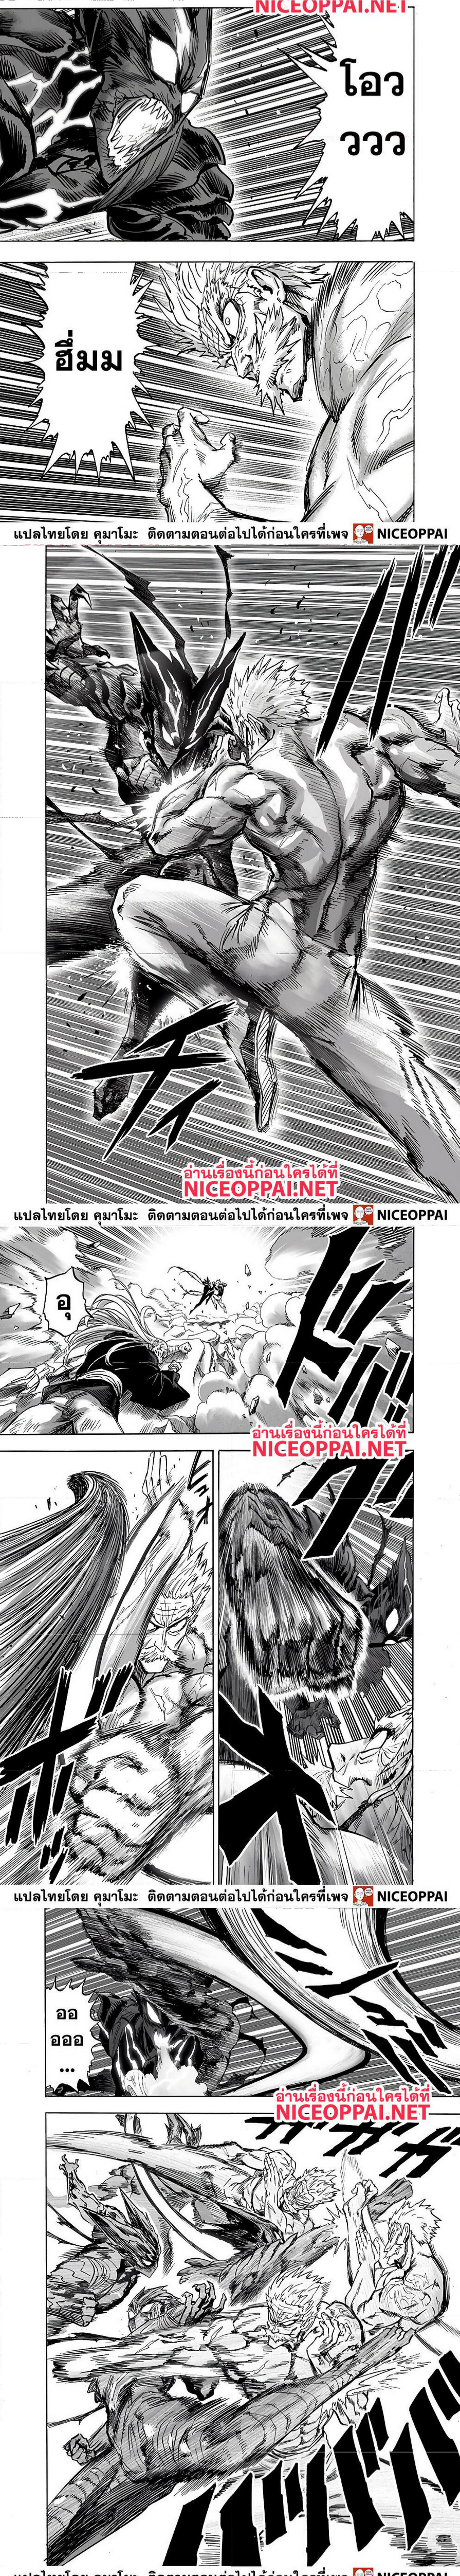 One Punch Man148 (2)